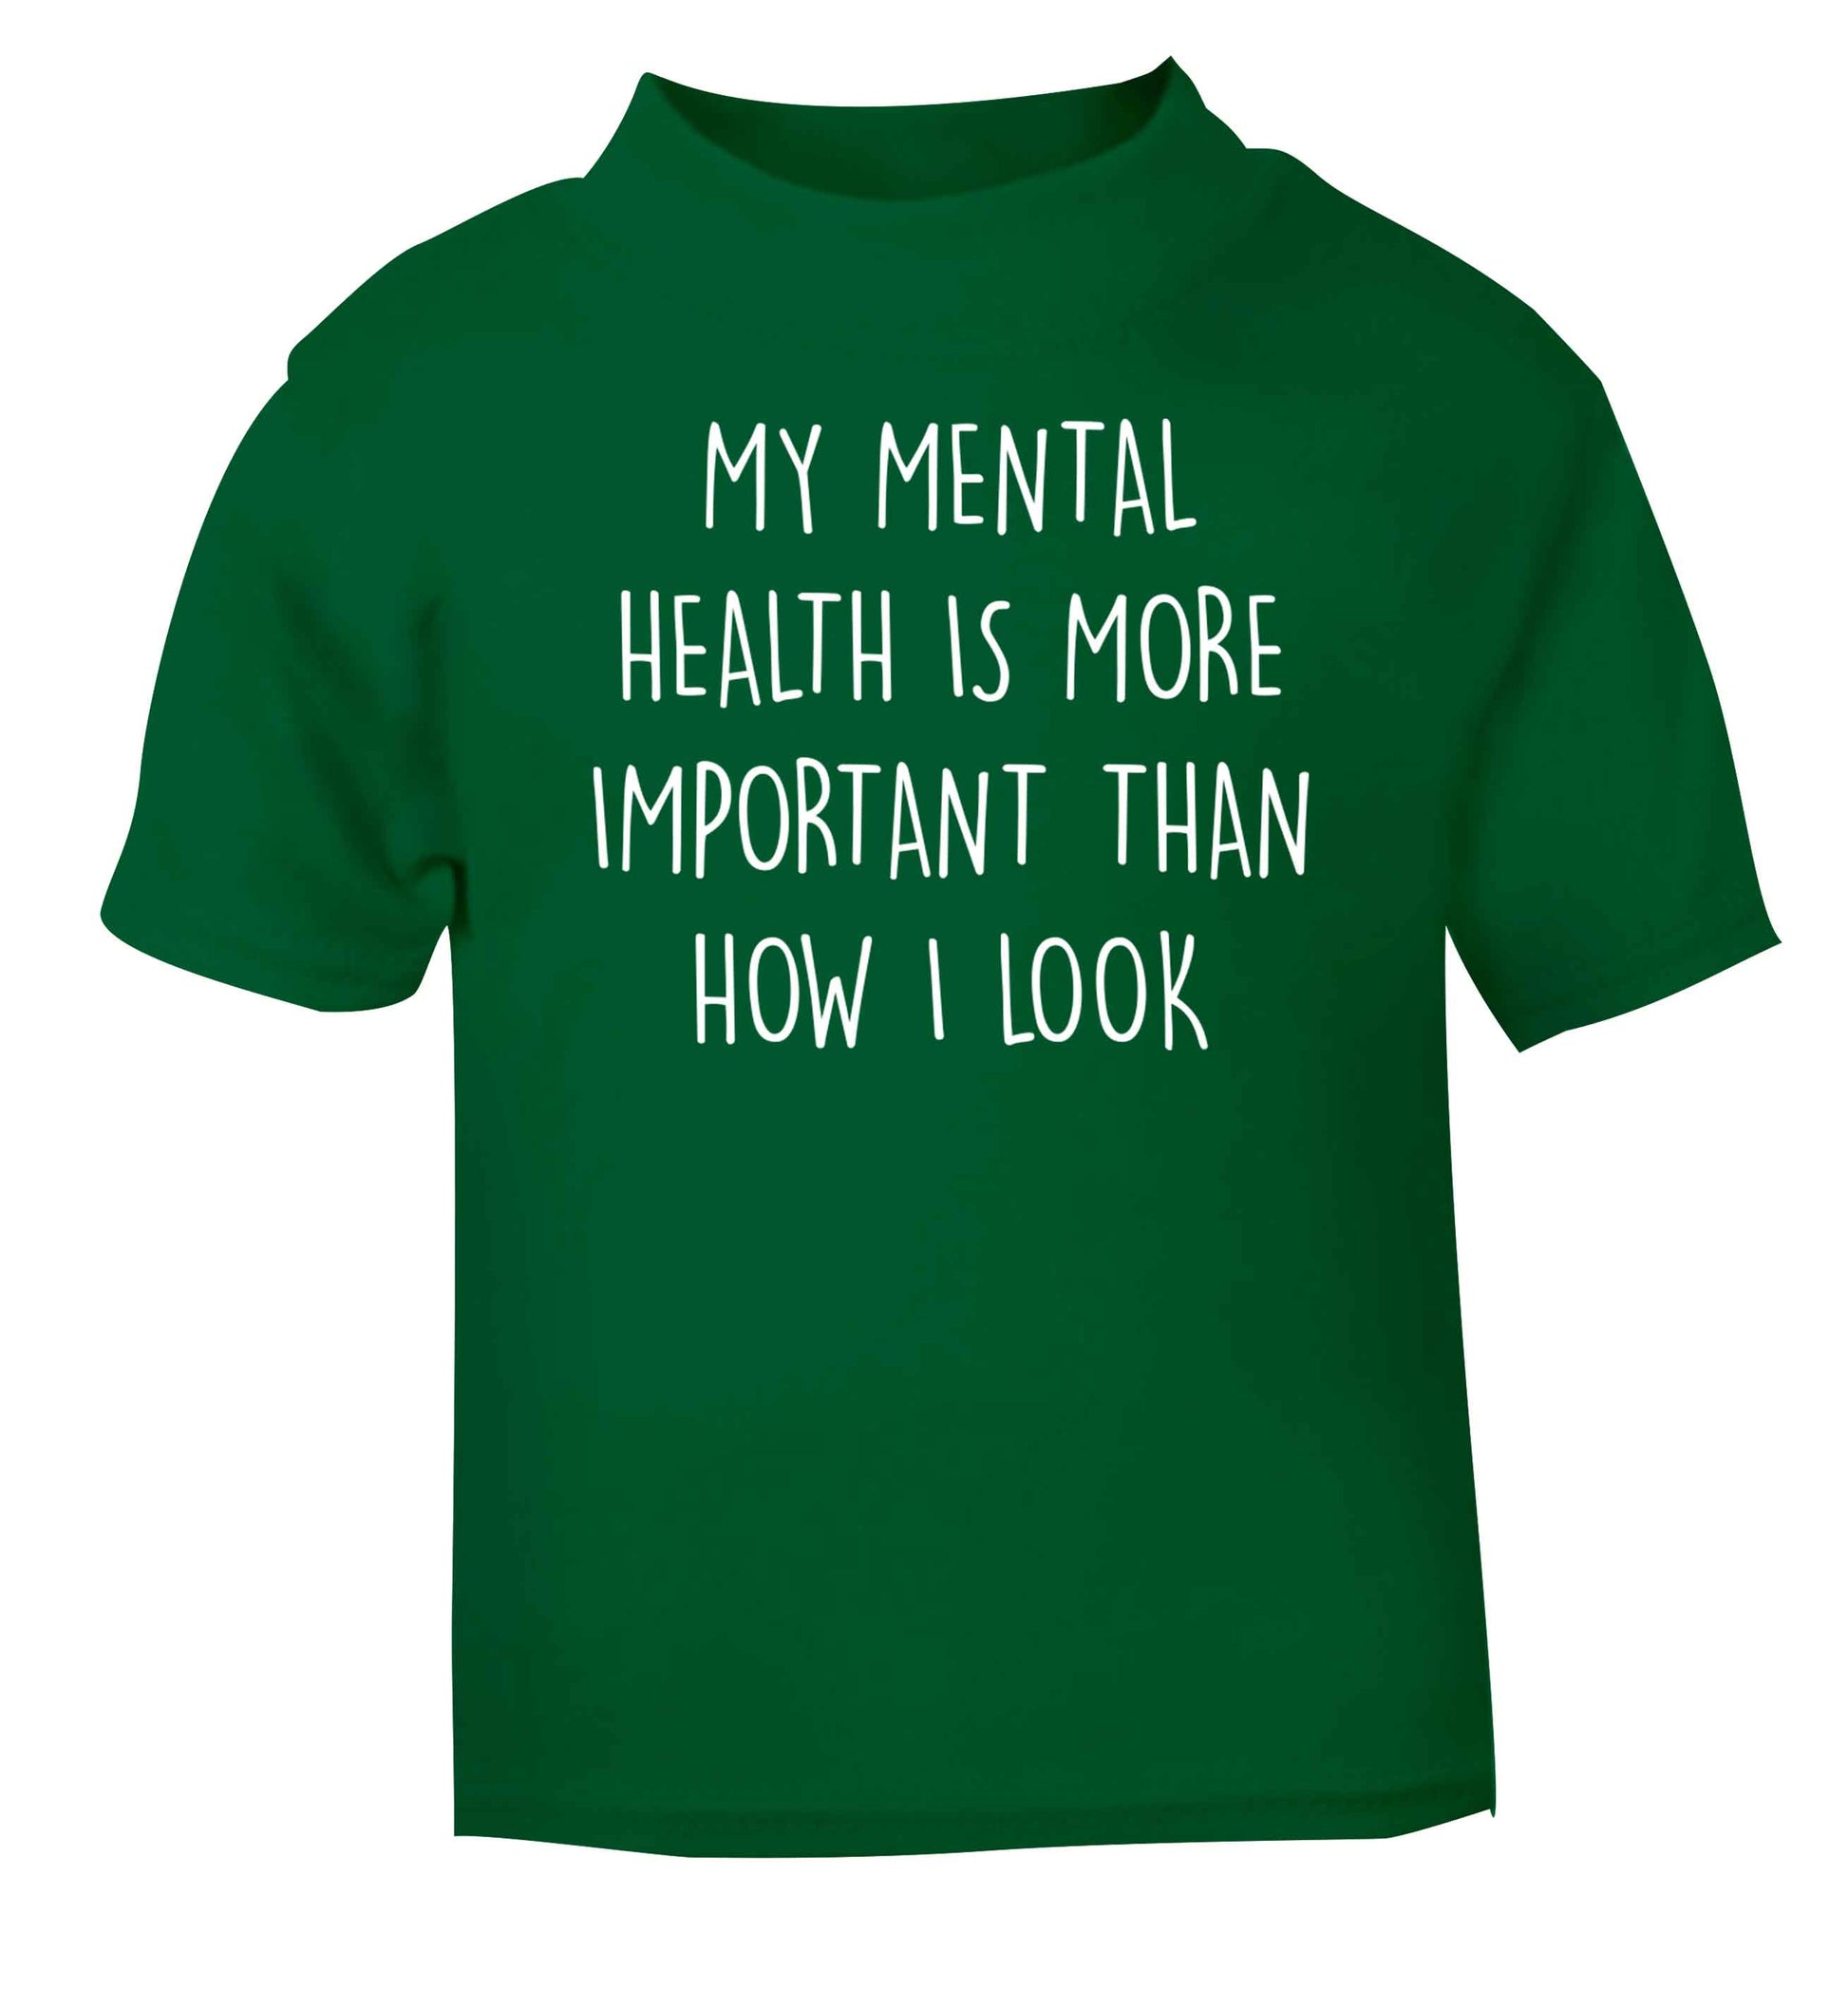 My mental health is more importnat than how I look green baby toddler Tshirt 2 Years